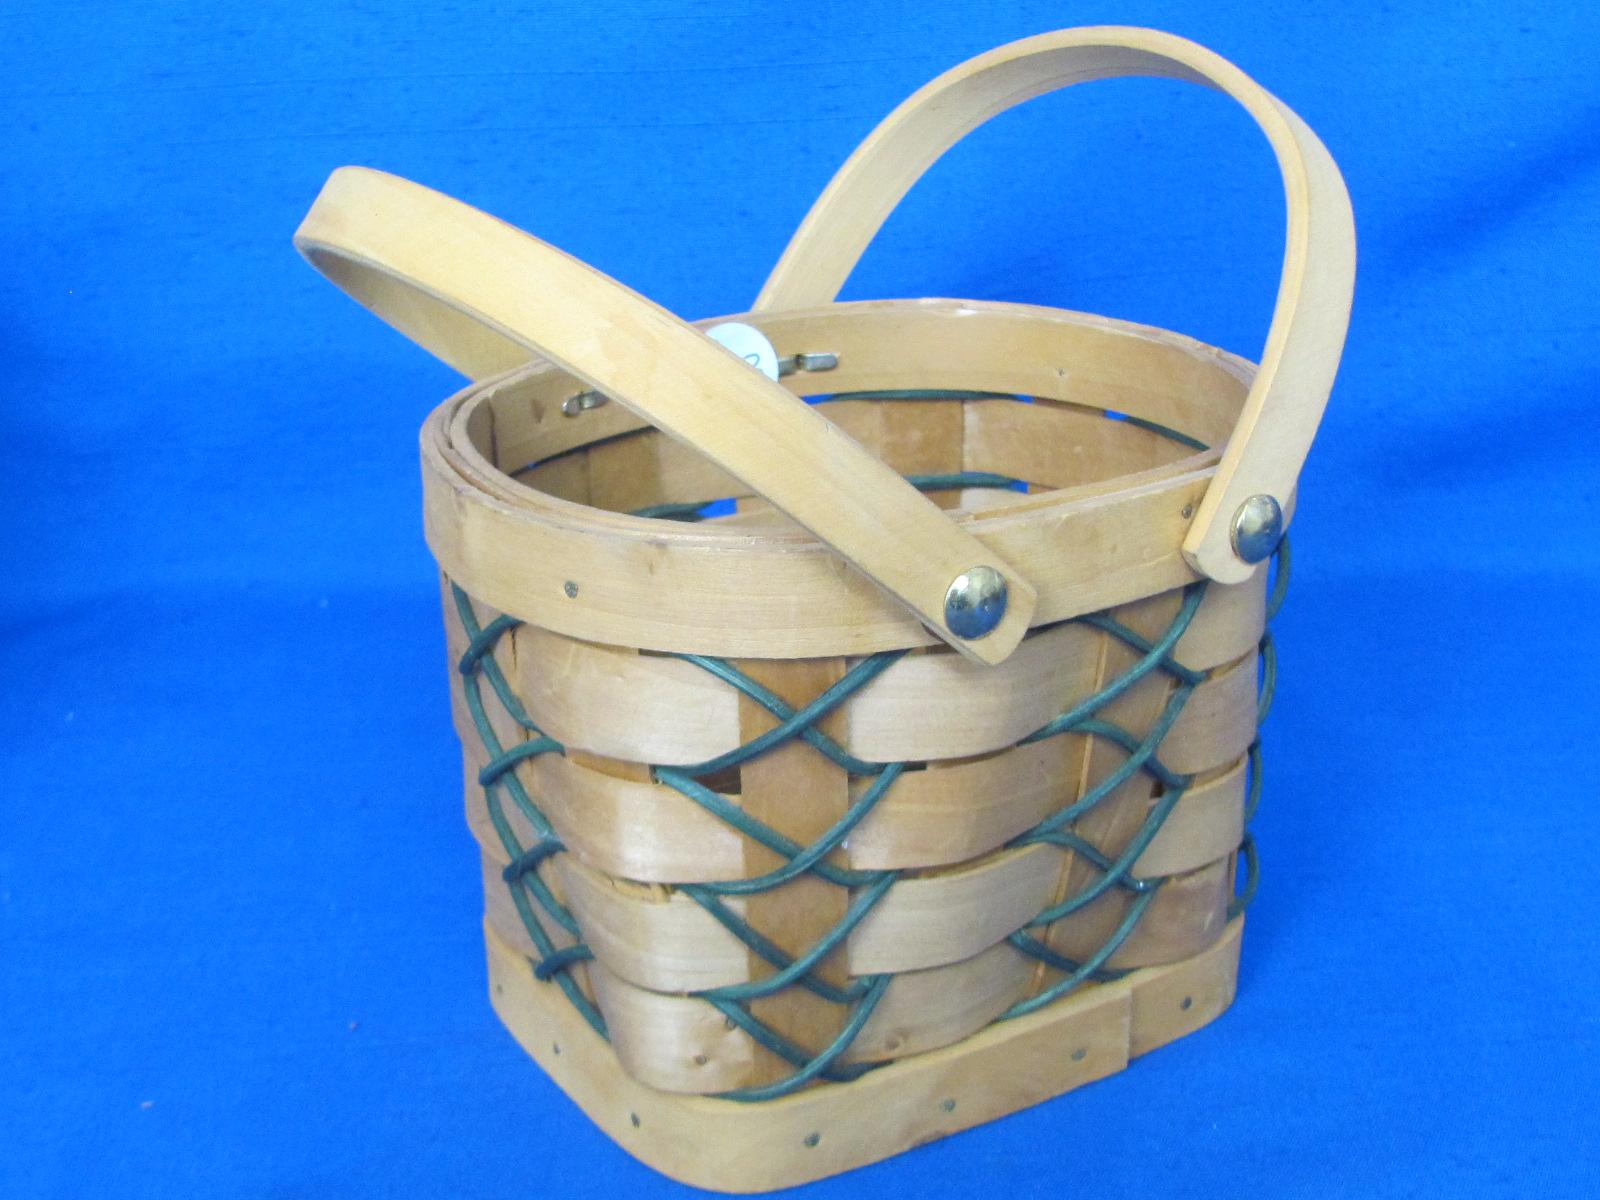 3 Woven Baskets: 2 are “Let it Snow” with Blue Trim – Largest is 8 1/2” long